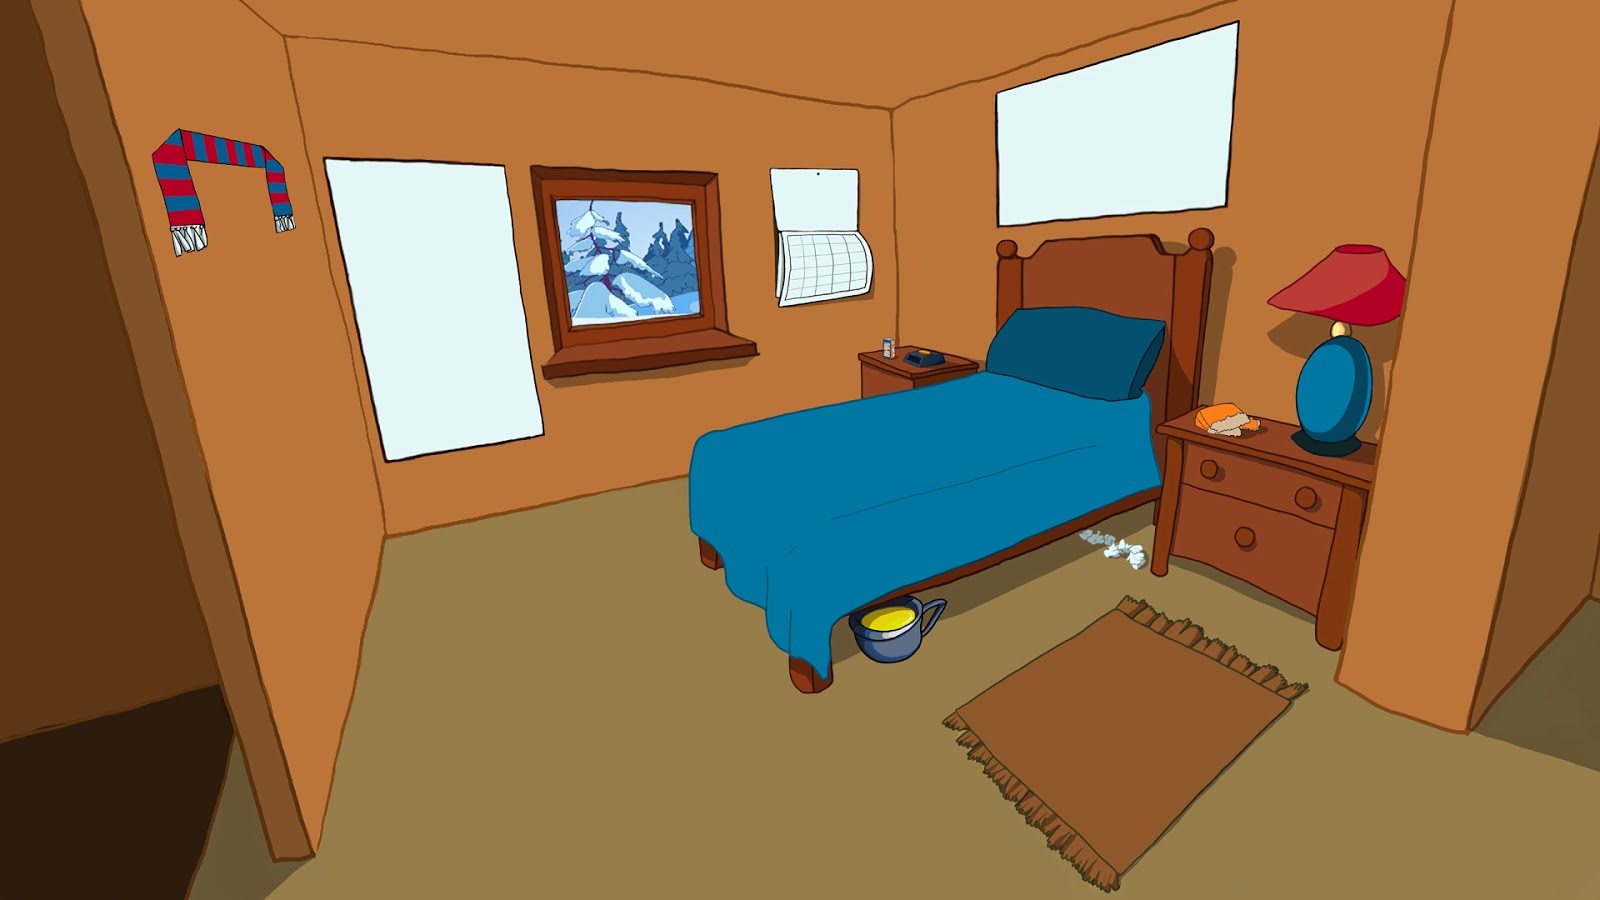 Adventures of a scary bear: Finished Willy backgrounds - bedroom scene